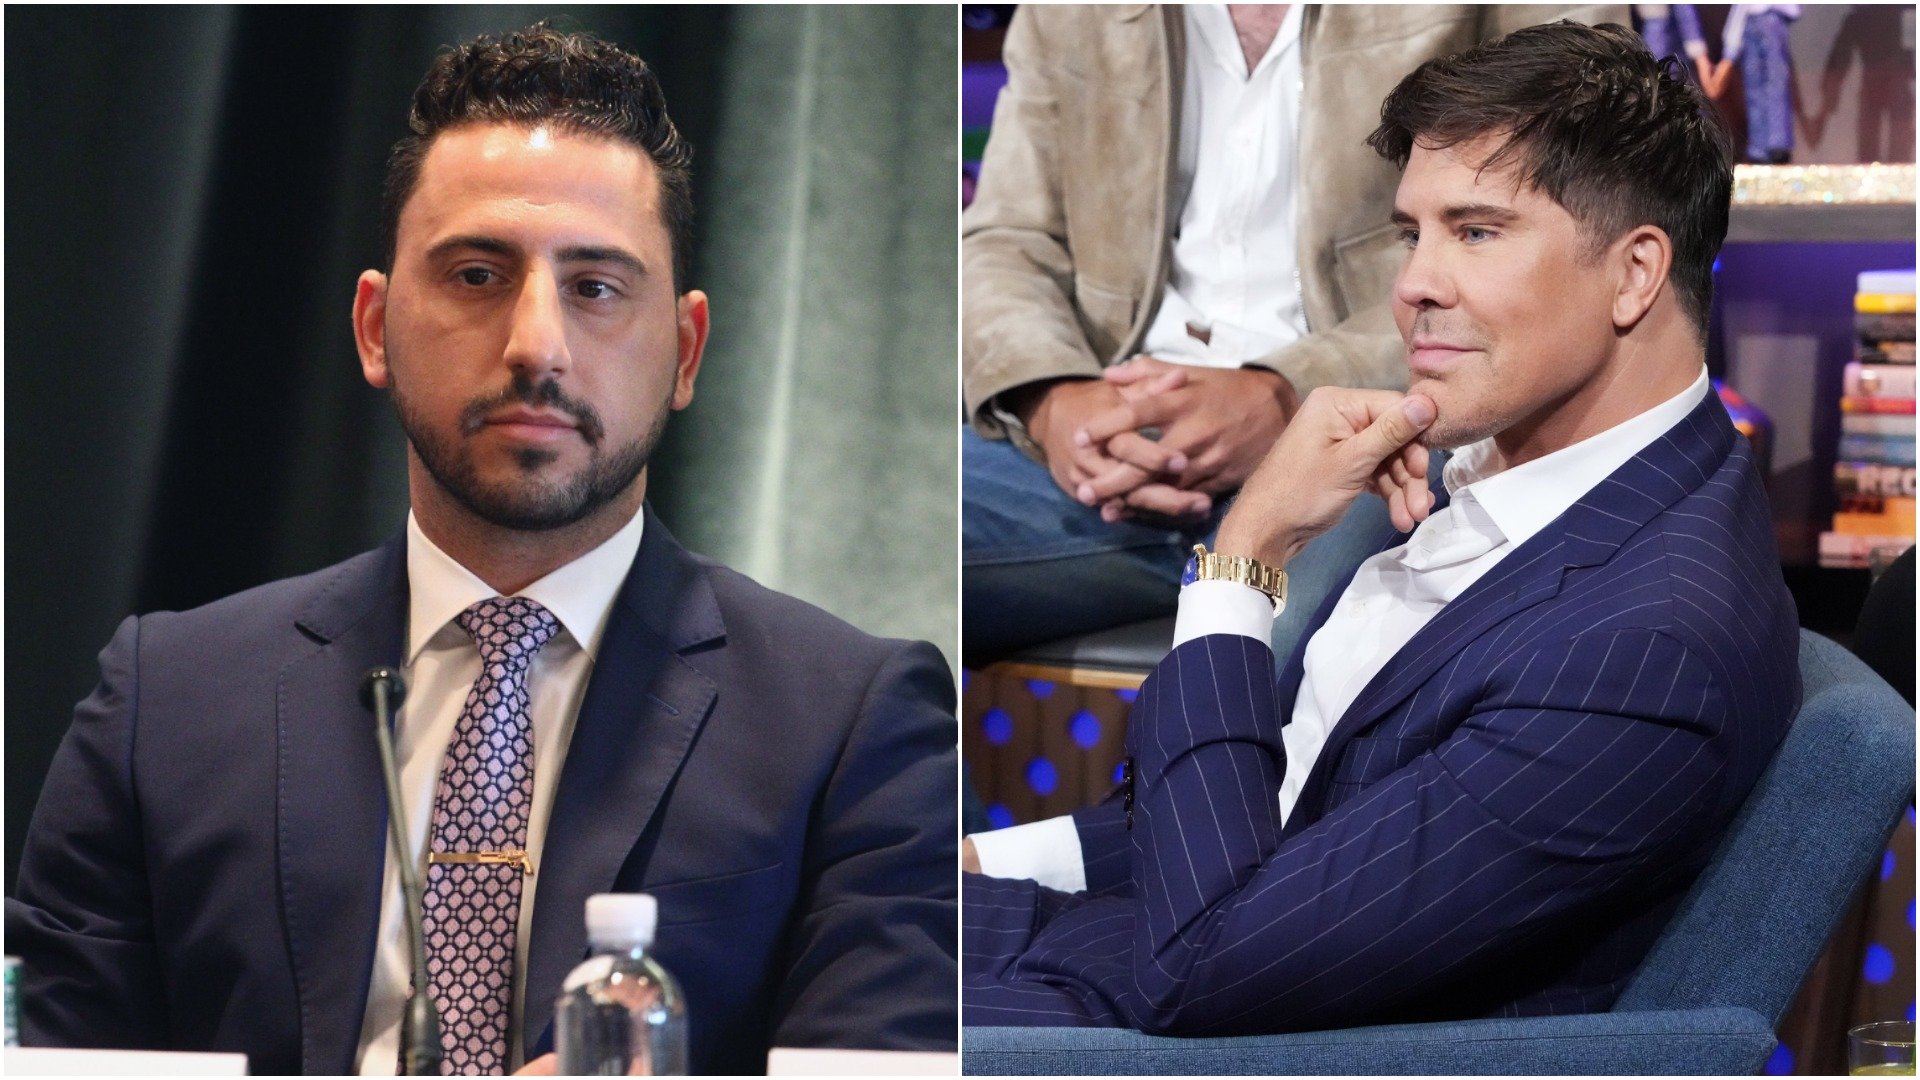 ‘Million Dollar Listing’: Fredrik Eklund and Josh Altman’s Smackdown May Have Launched Their Fallout